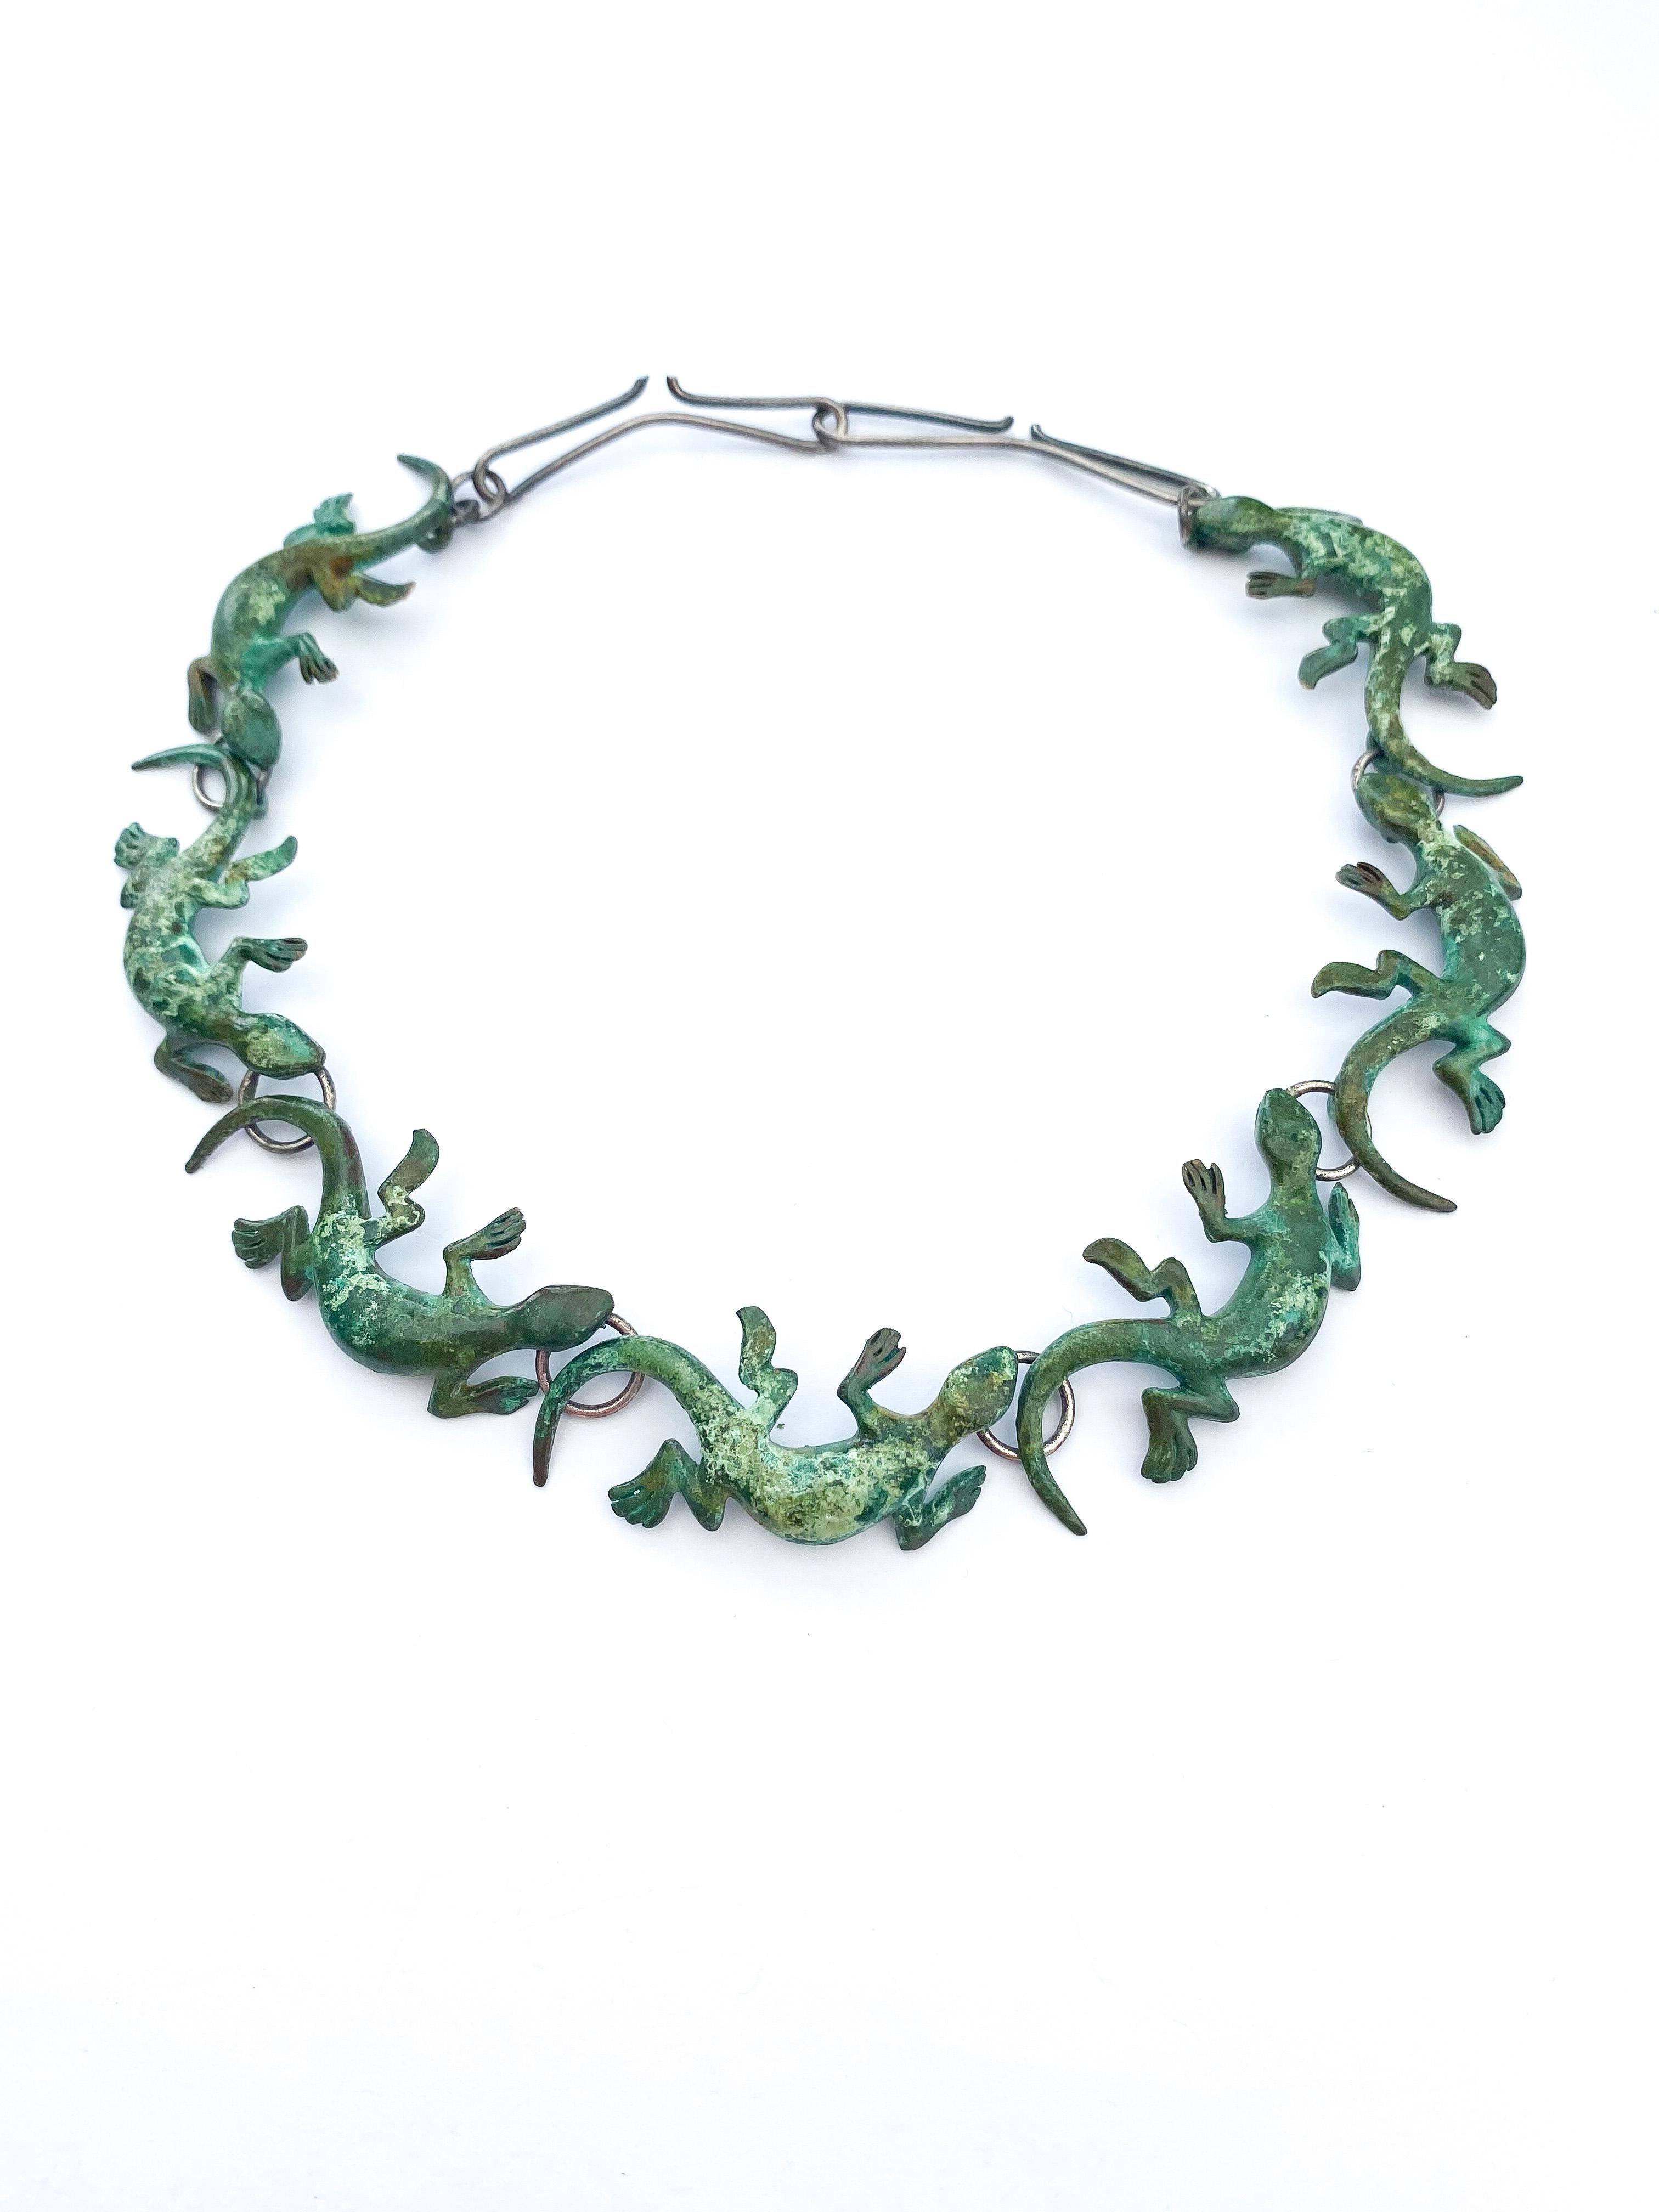 An unusual and whimsical design of salamanders, the motif repeated seven times throughout the necklace. The designer or maker, and country,  is unknown but it would seem to be a one off piece, the individual 'salamanders' are cast, then assembled by